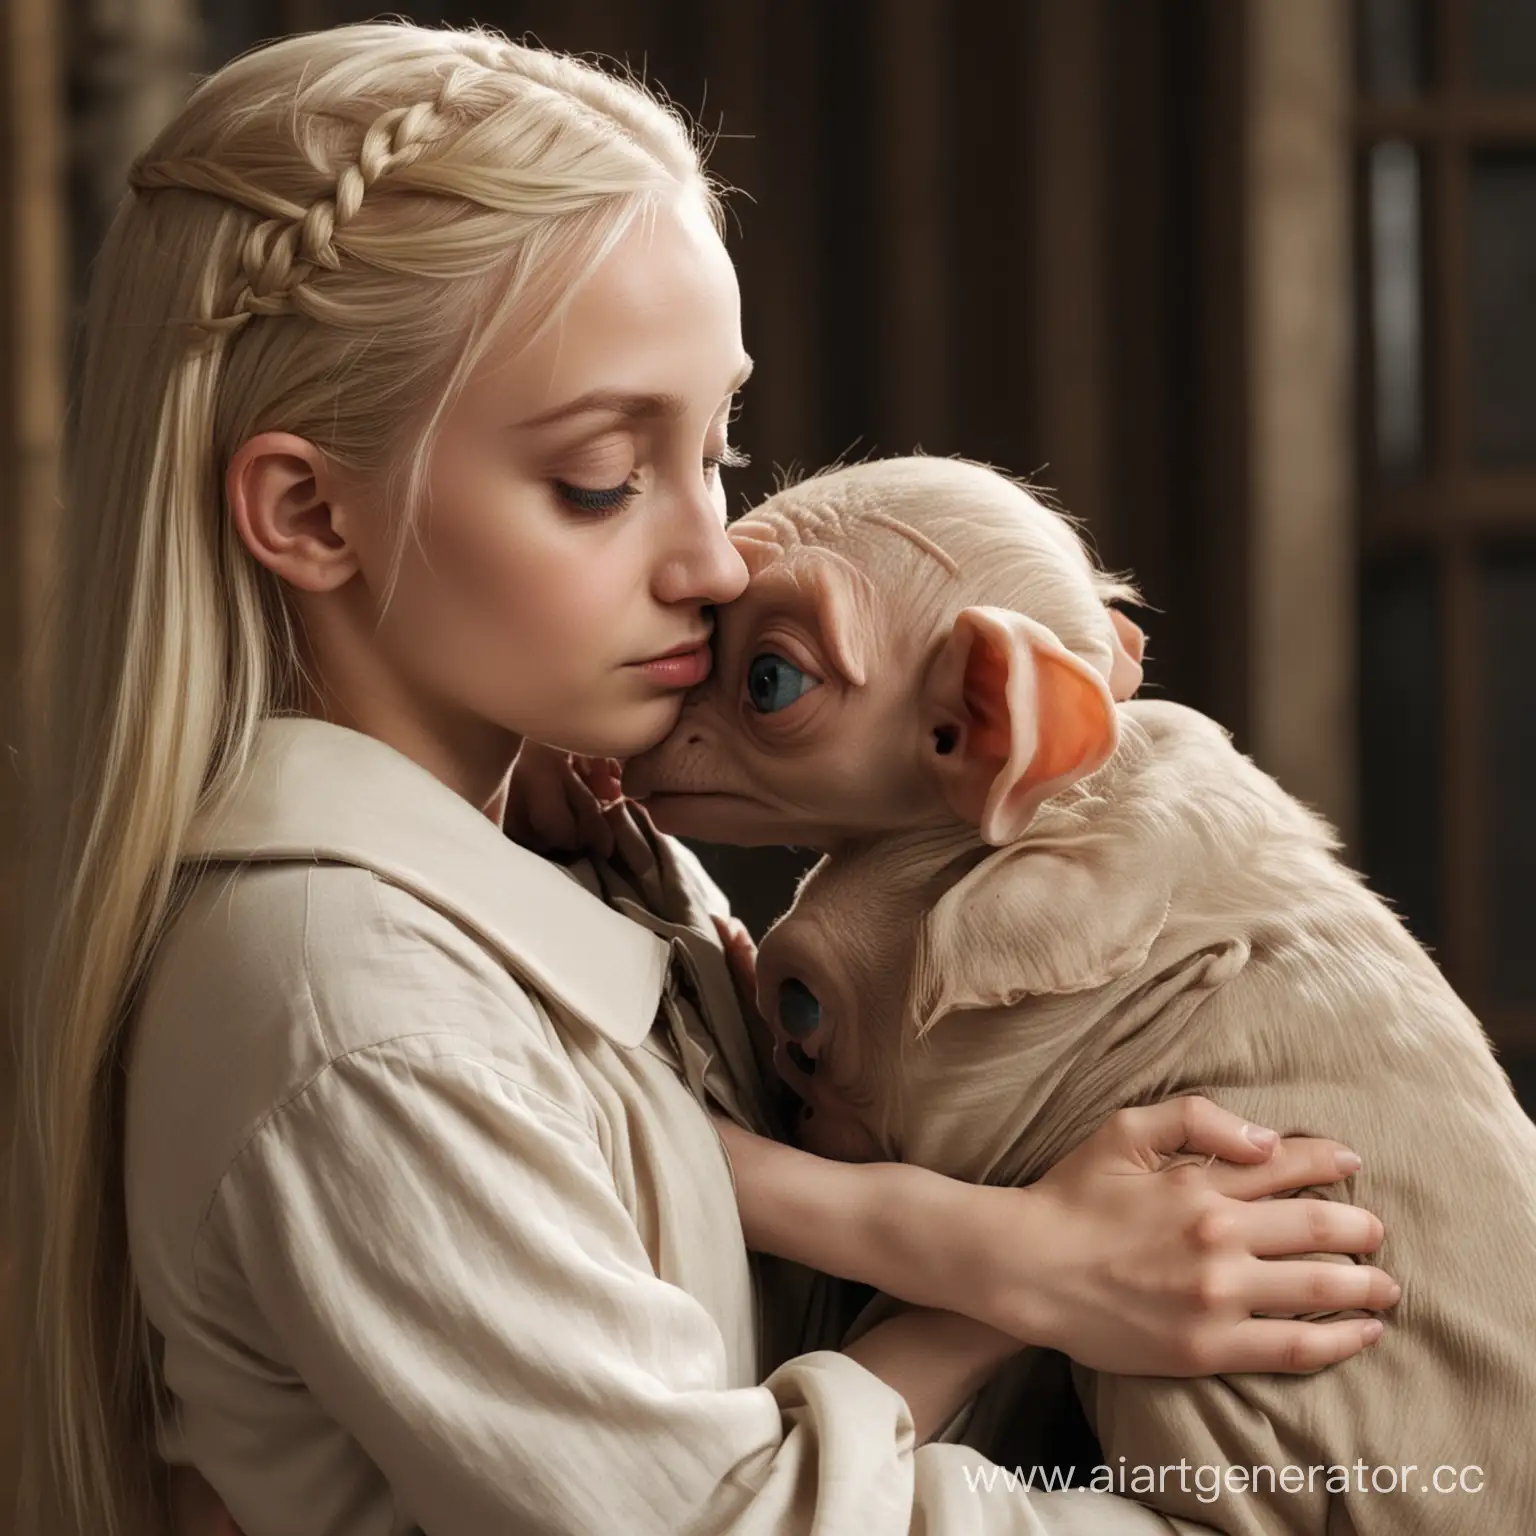 A beautiful girl with blonde hair and blue eyes is on her knees and hugging Dobby at Malfoy Manor, a side view